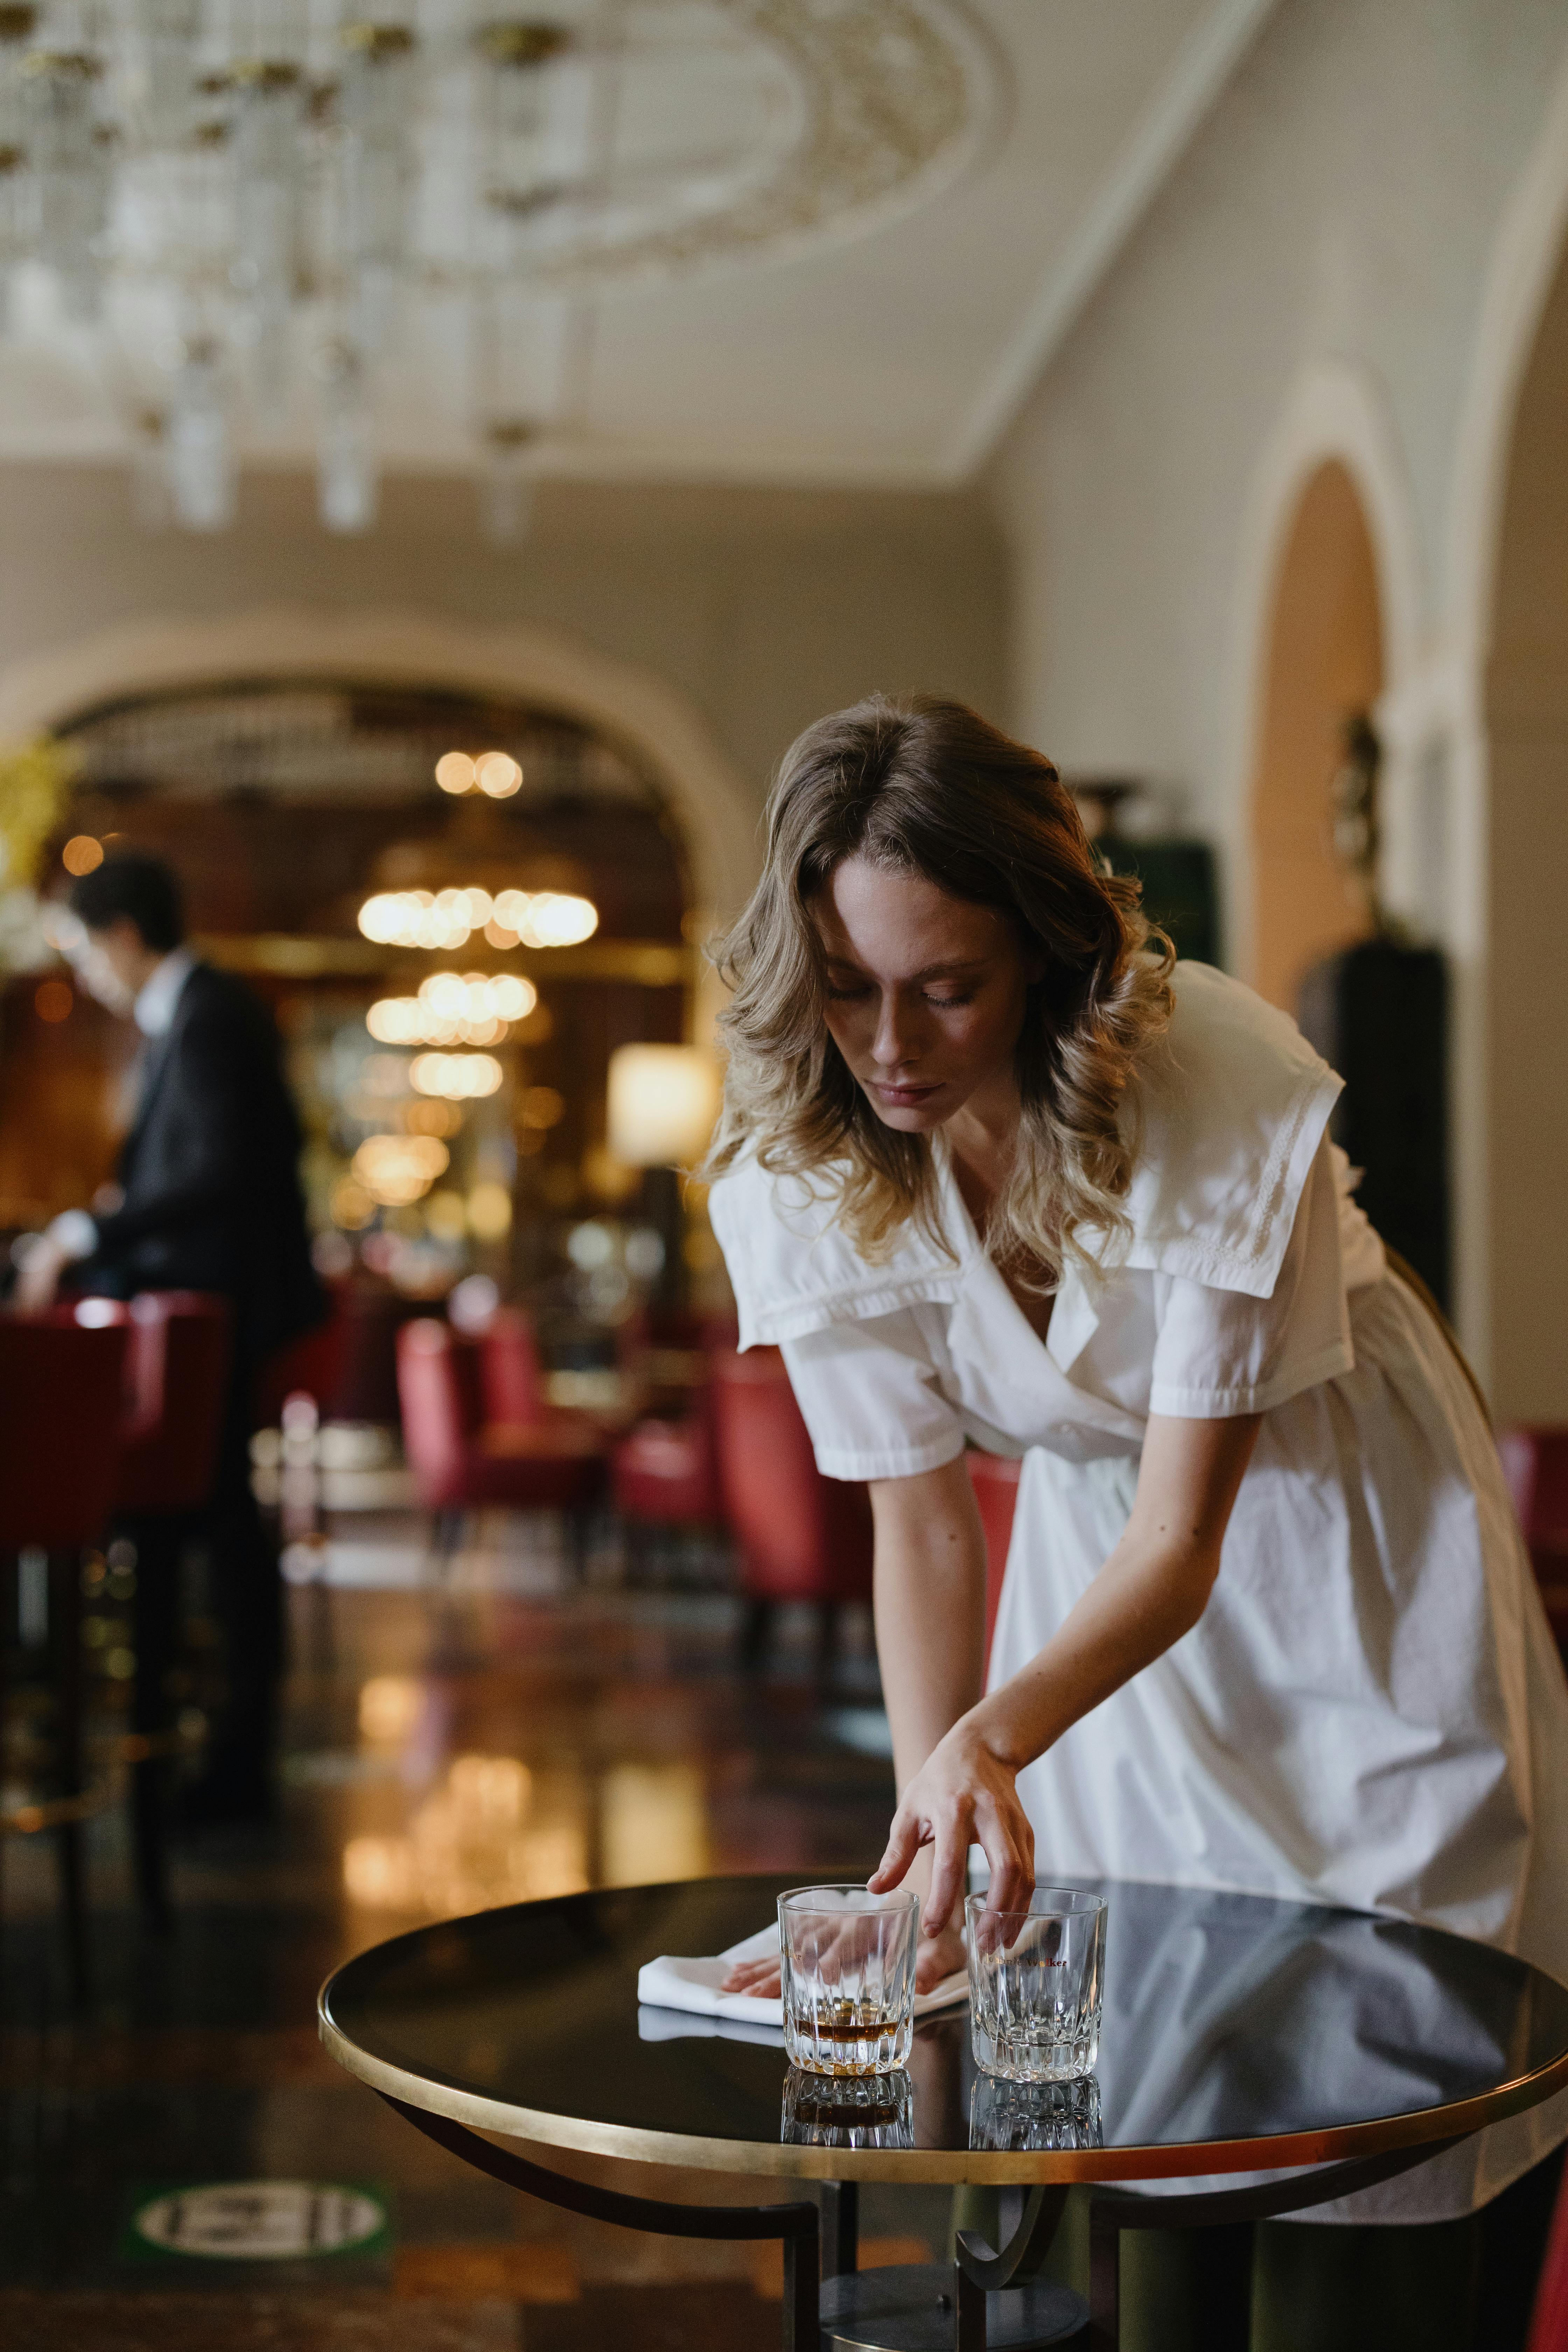 A woman wiping down a restaurant table | Source: Pexels